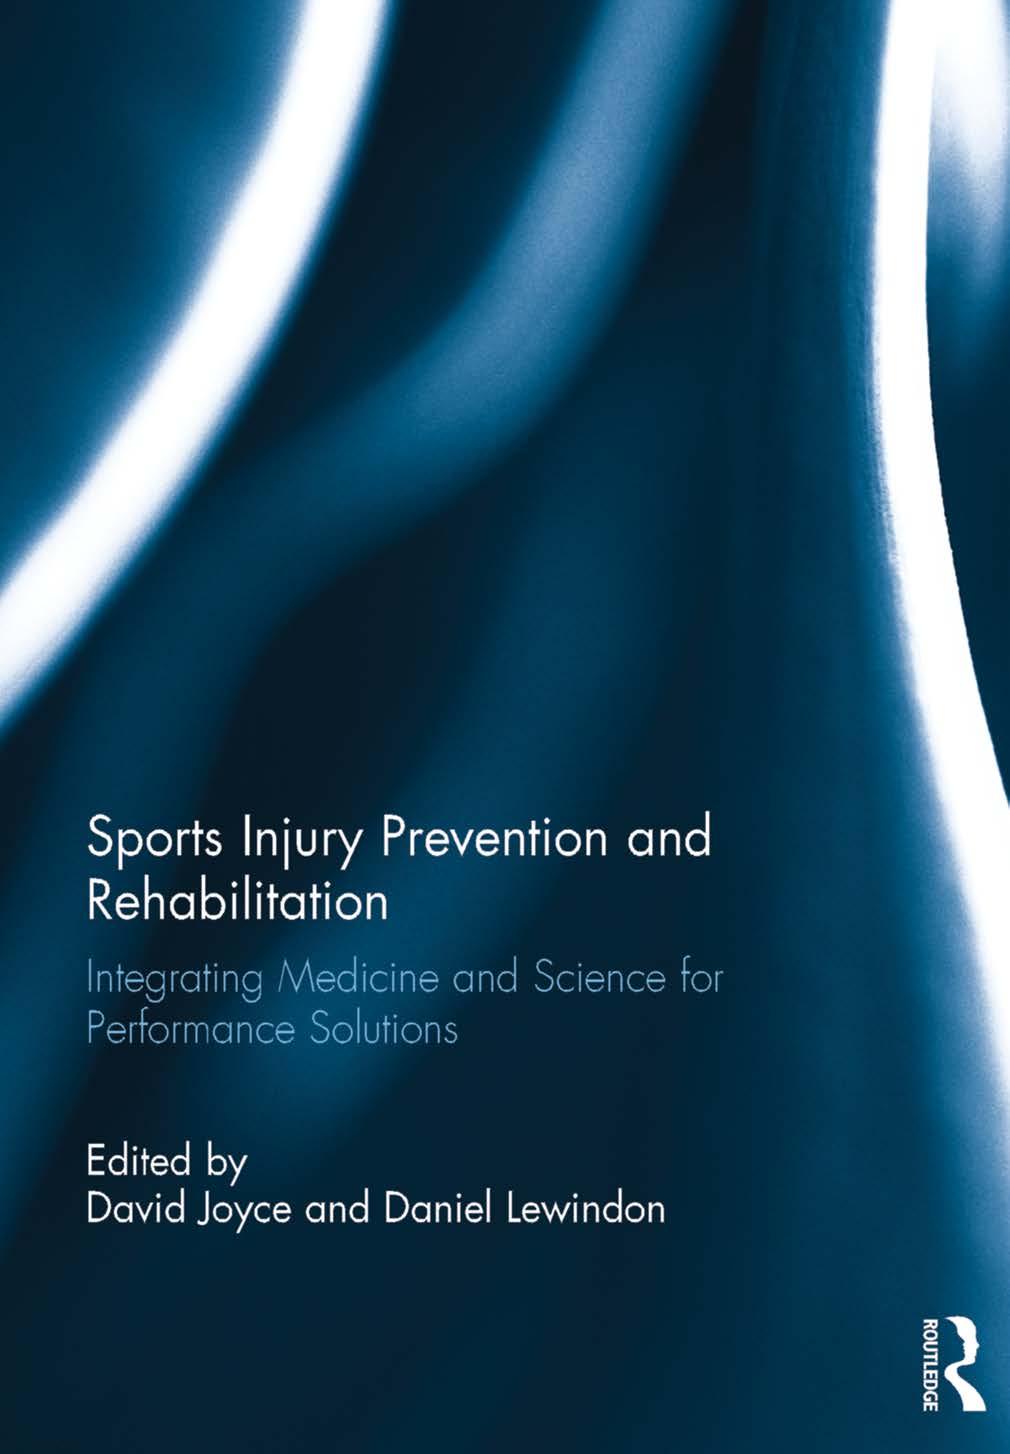 Sports Injury Prevention and Rehabilitation  Integrating Medicine and Science for Performance Solutions 2015